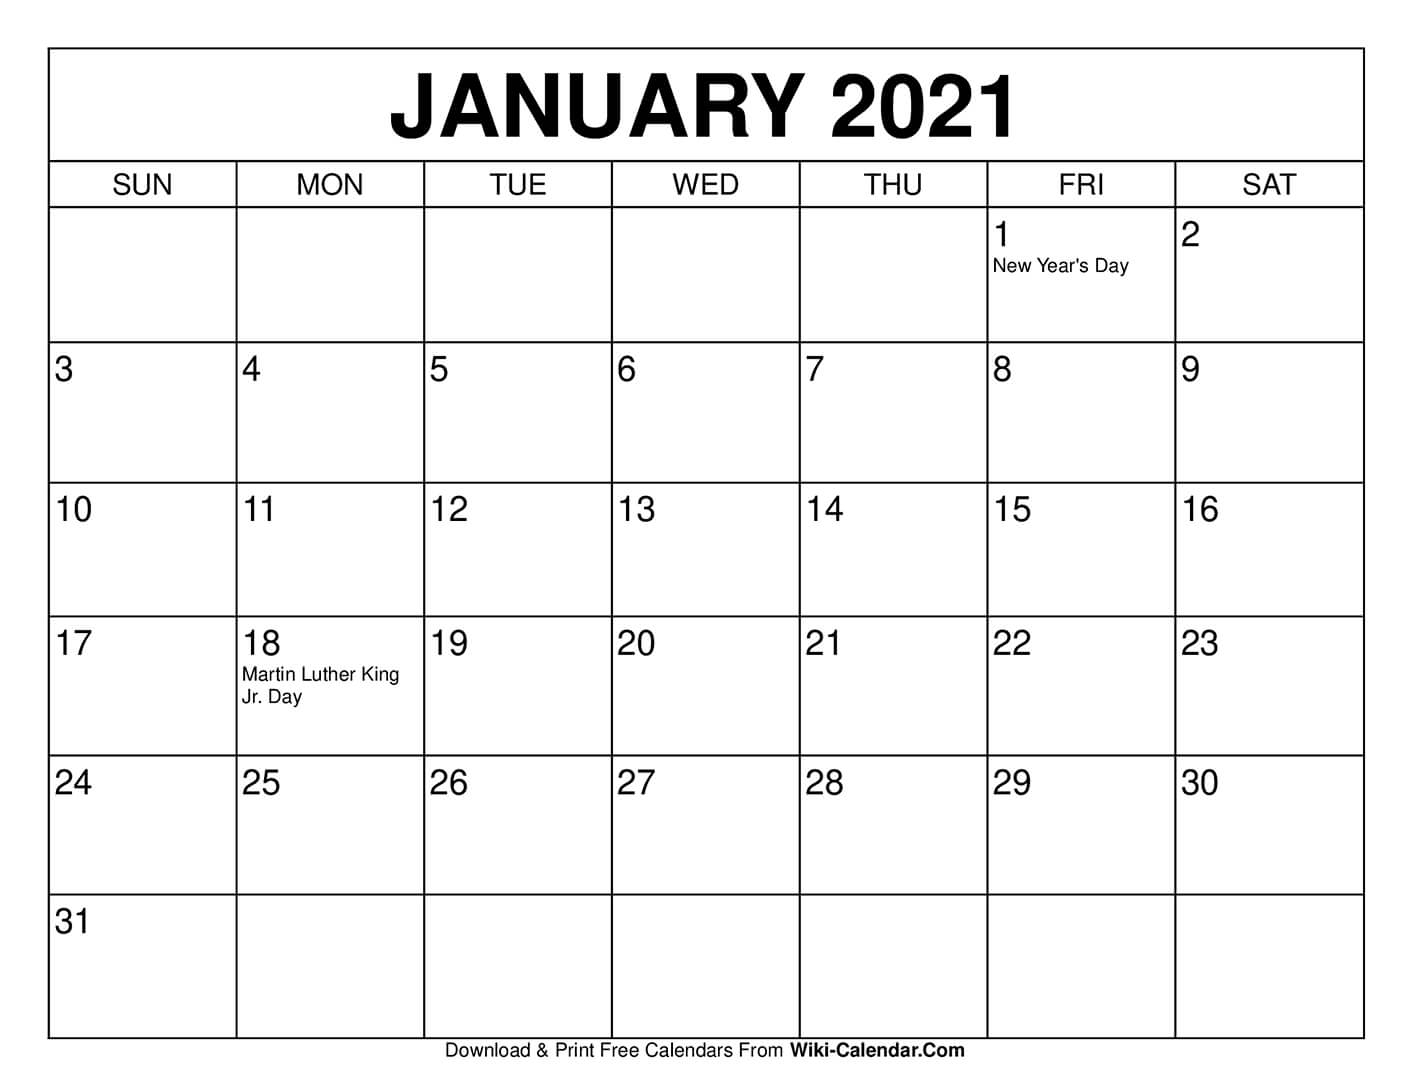 Print Free Calendars Without Downloading 2021